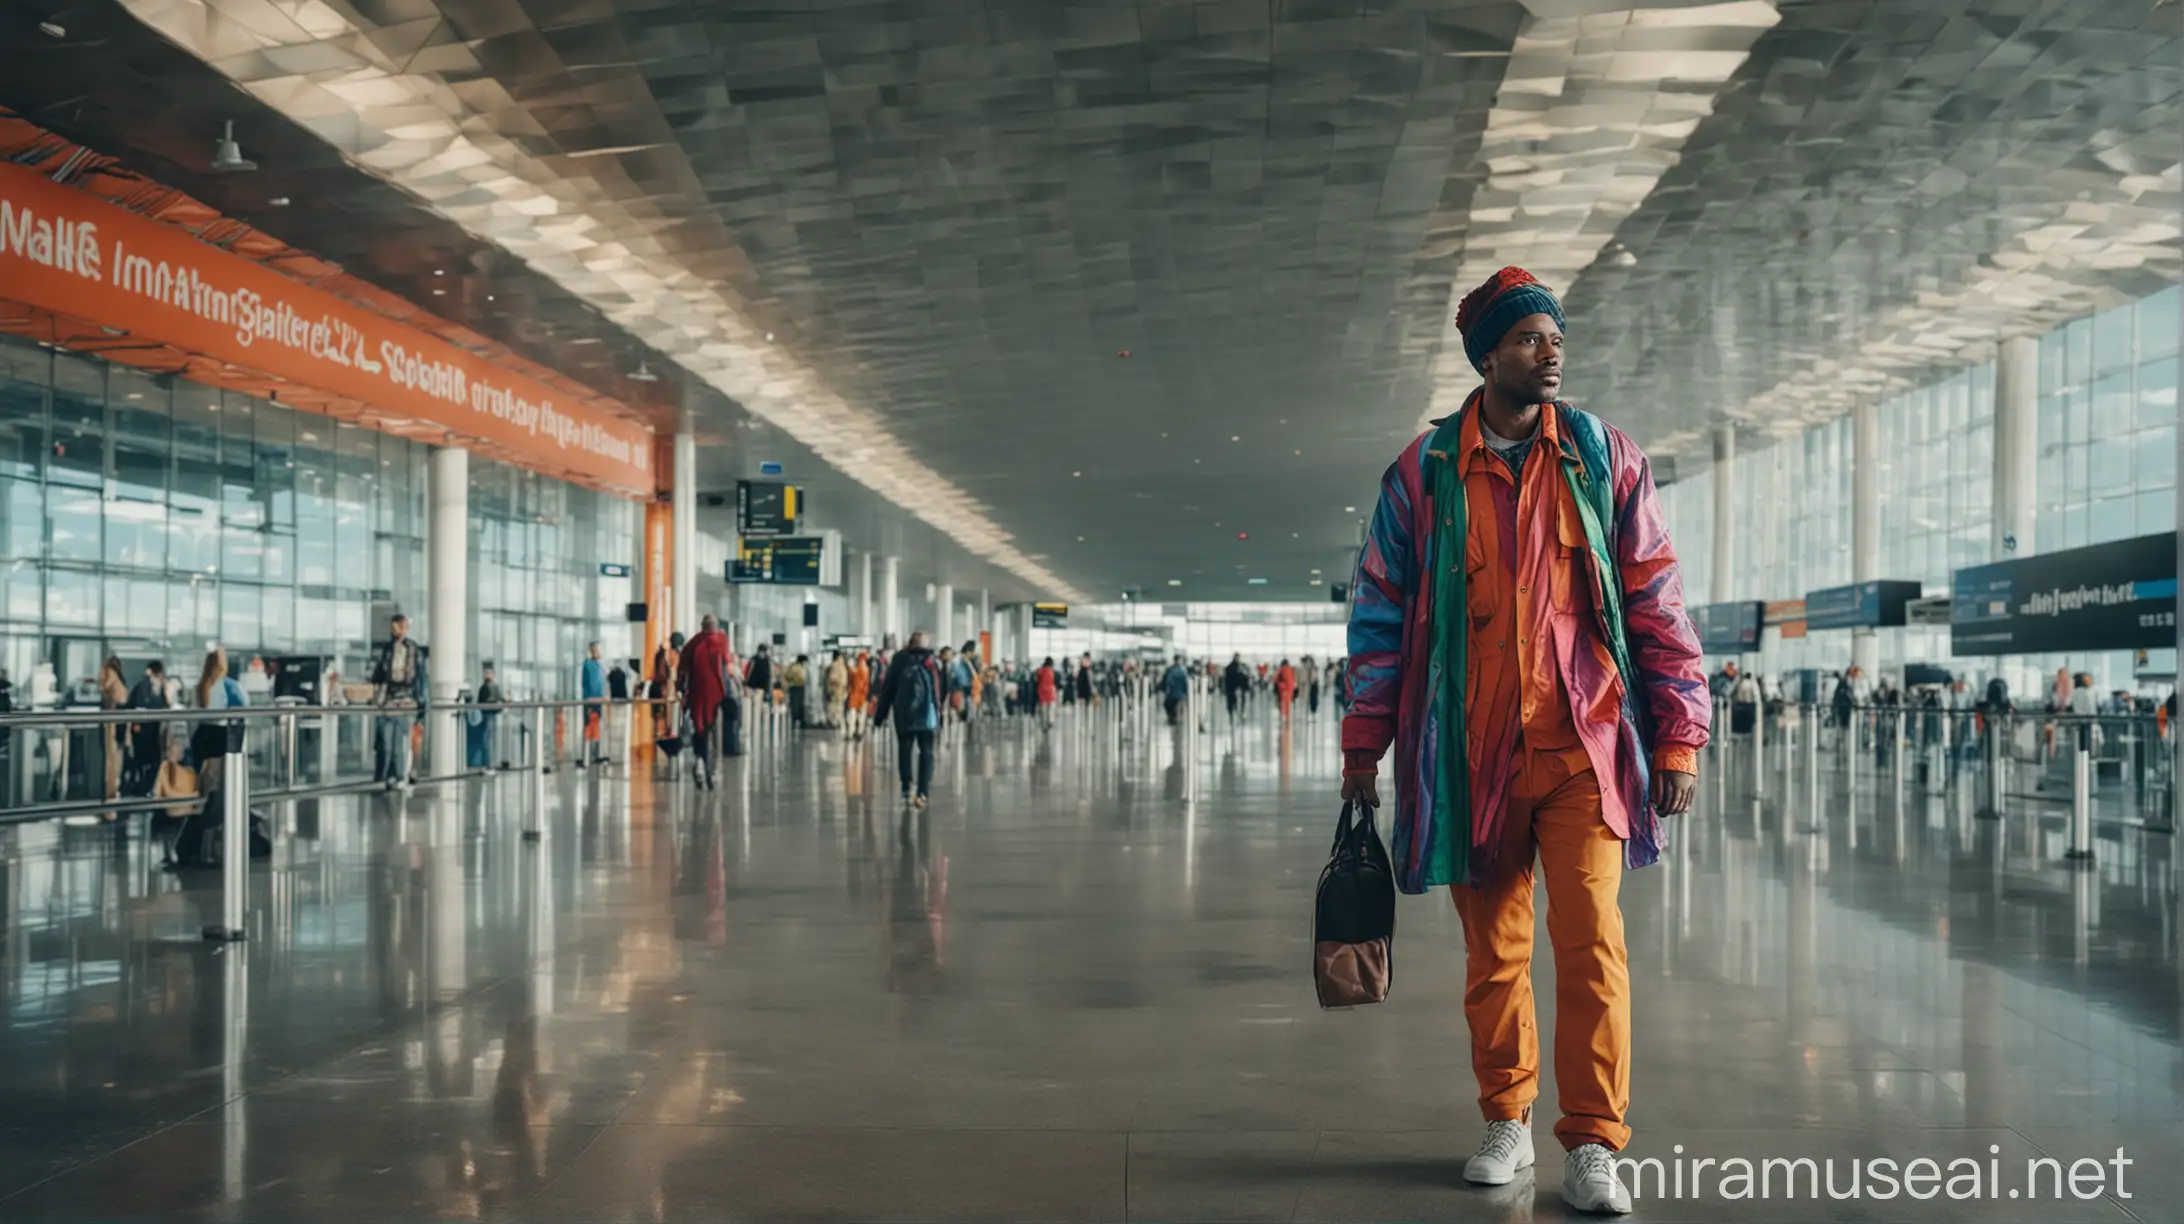 cinematic image of man wearing excessive layers of colourful clothing in an airport